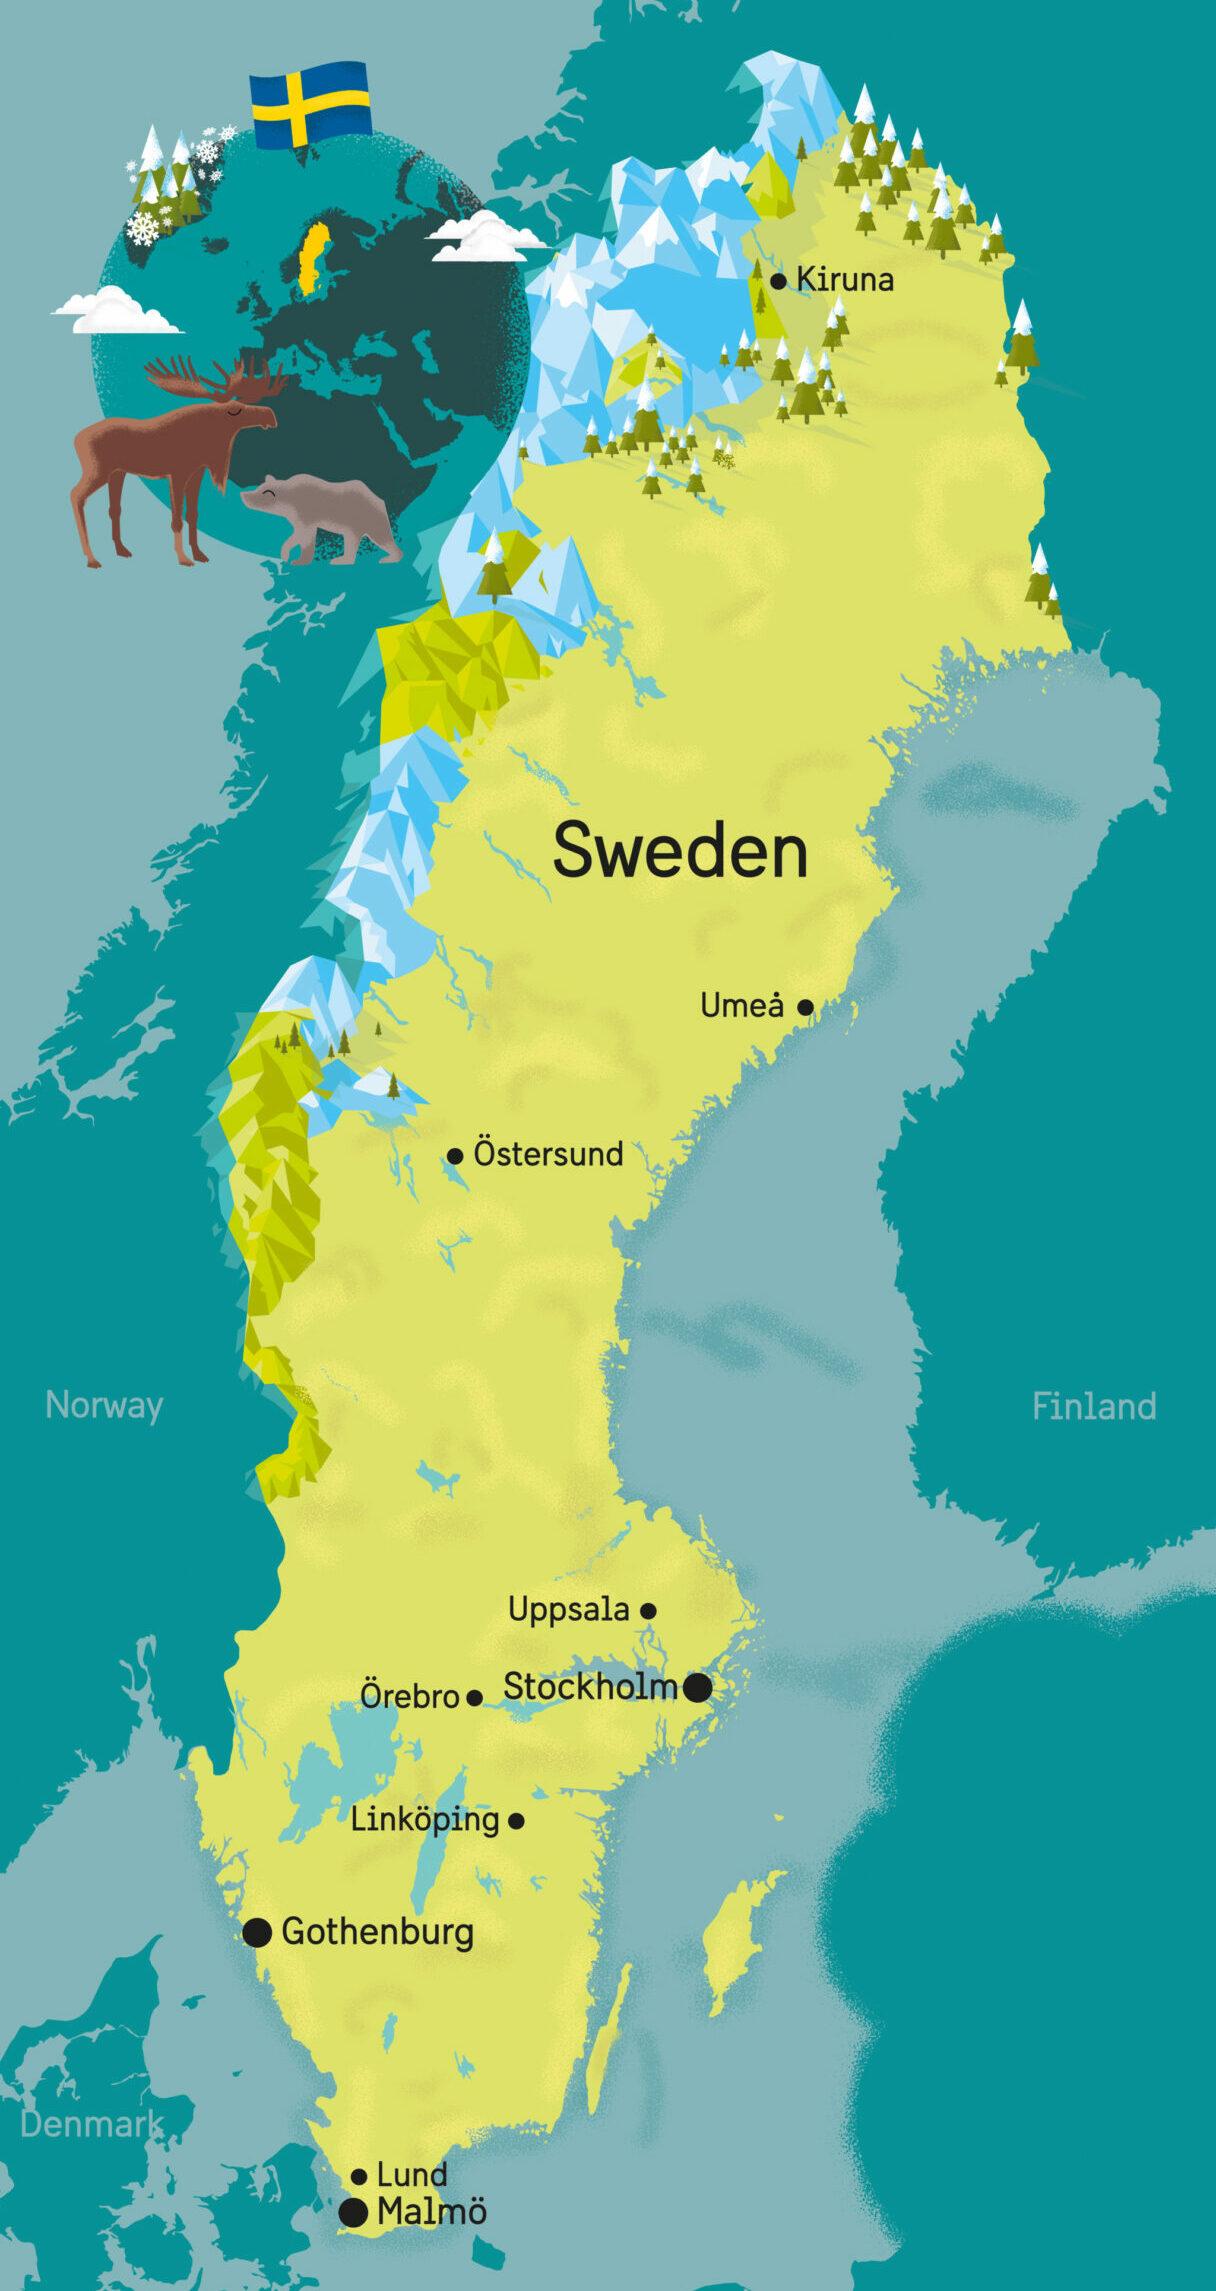 A map of Sweden with ten cities marked out.